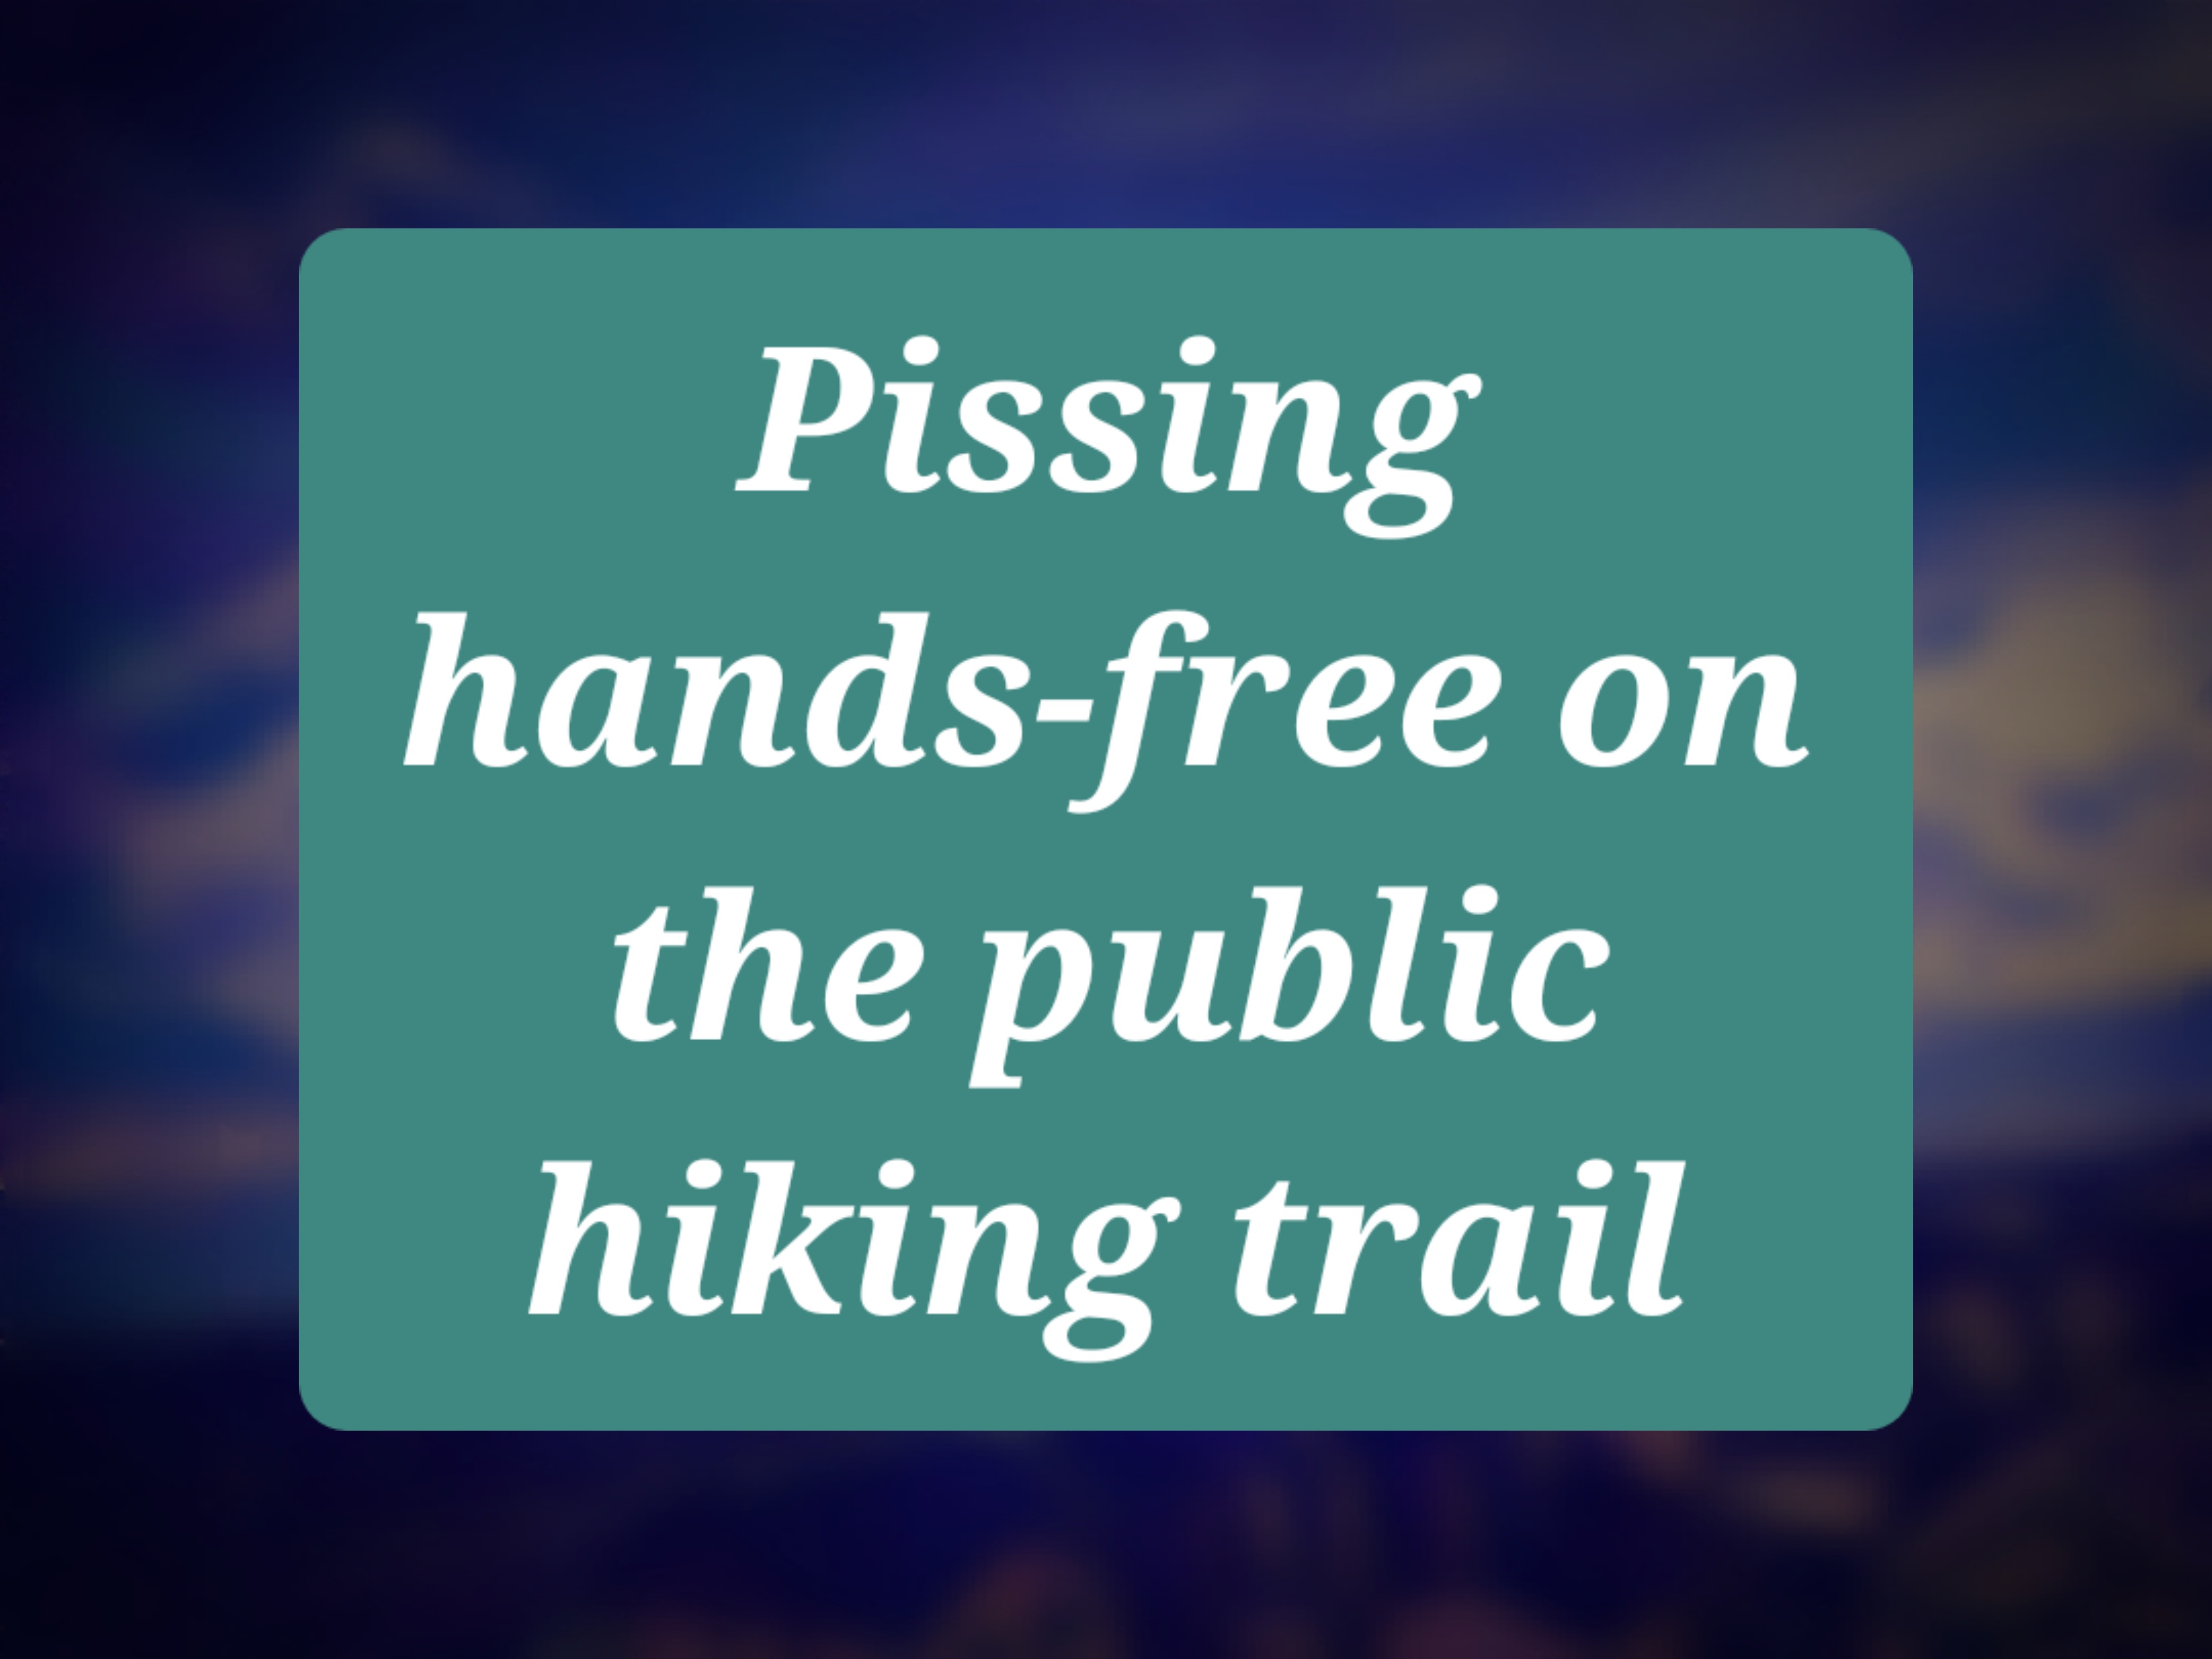 Pissing handsfree on a public hiking trail